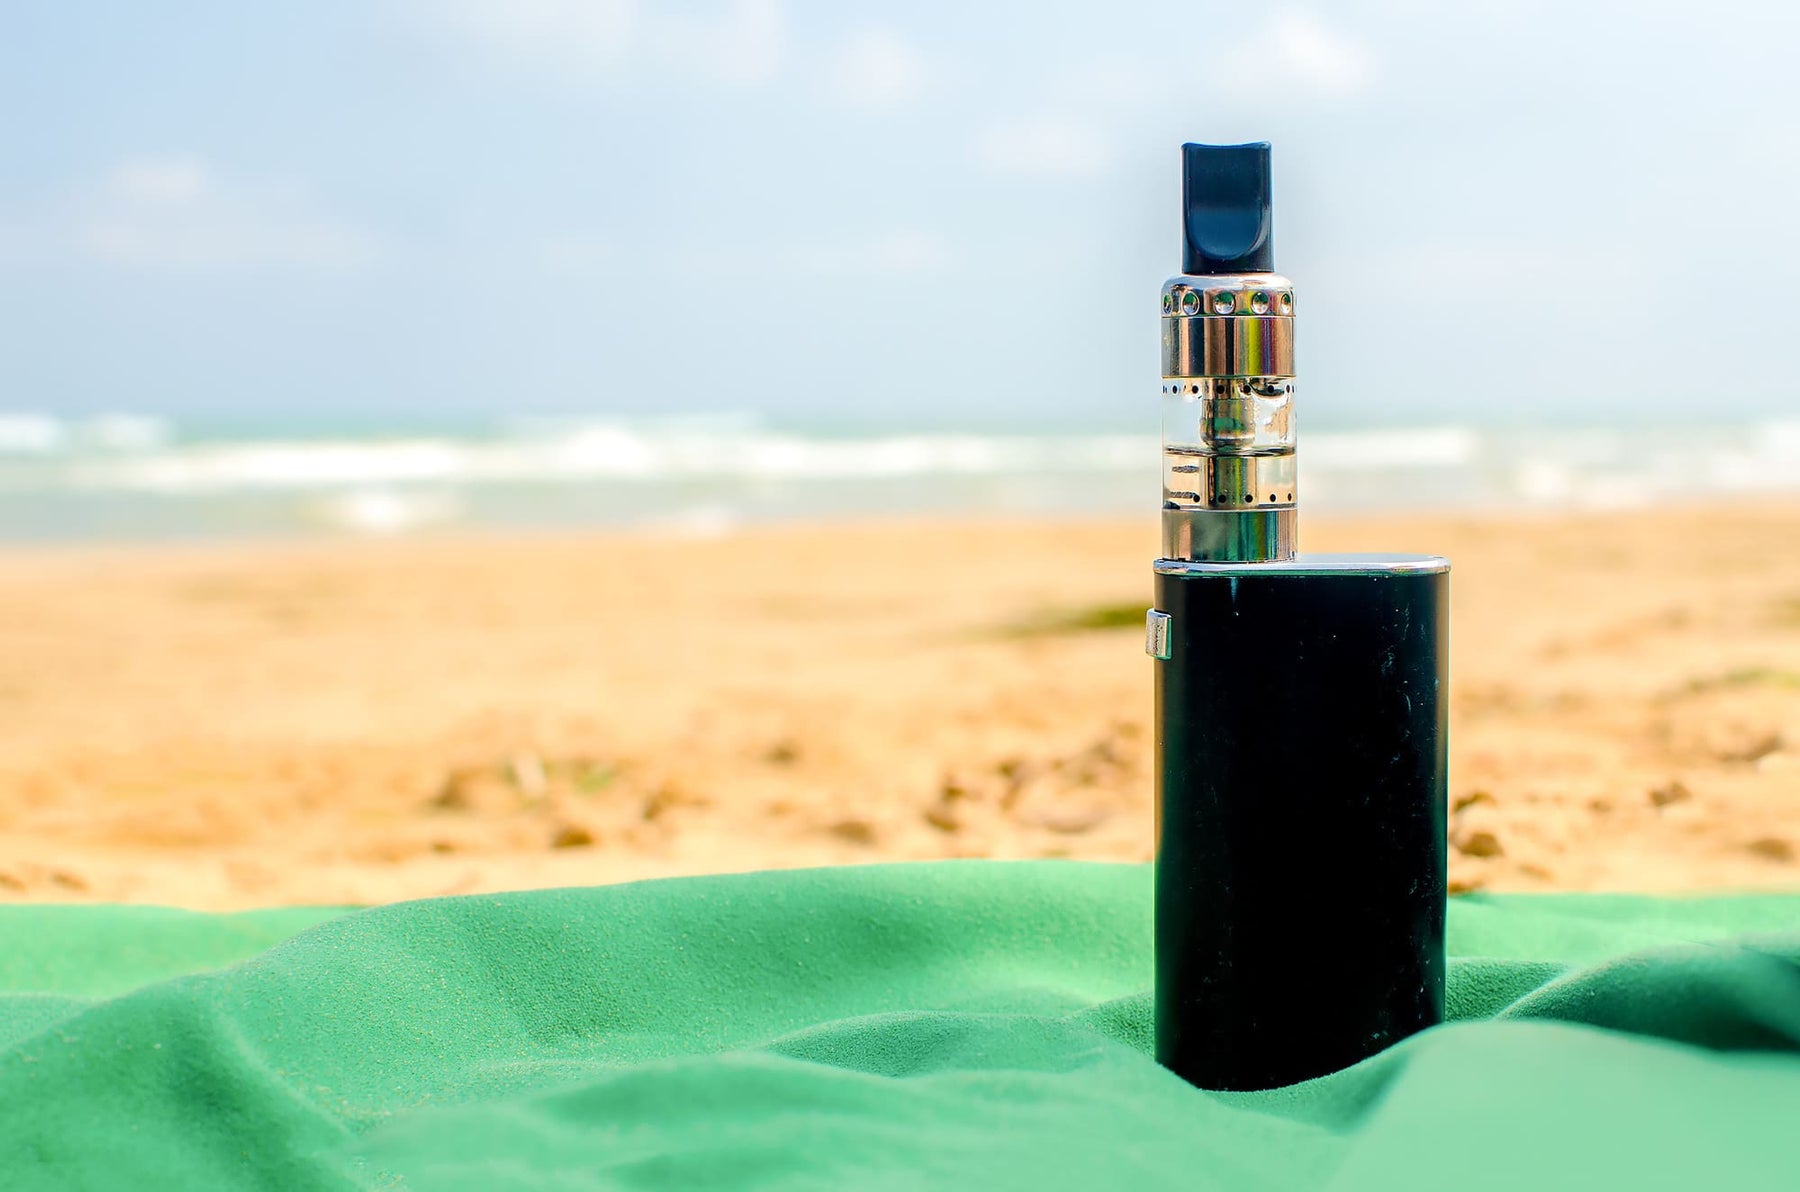 2019 Vape Travel Guide: Traveling With Vape Supplies